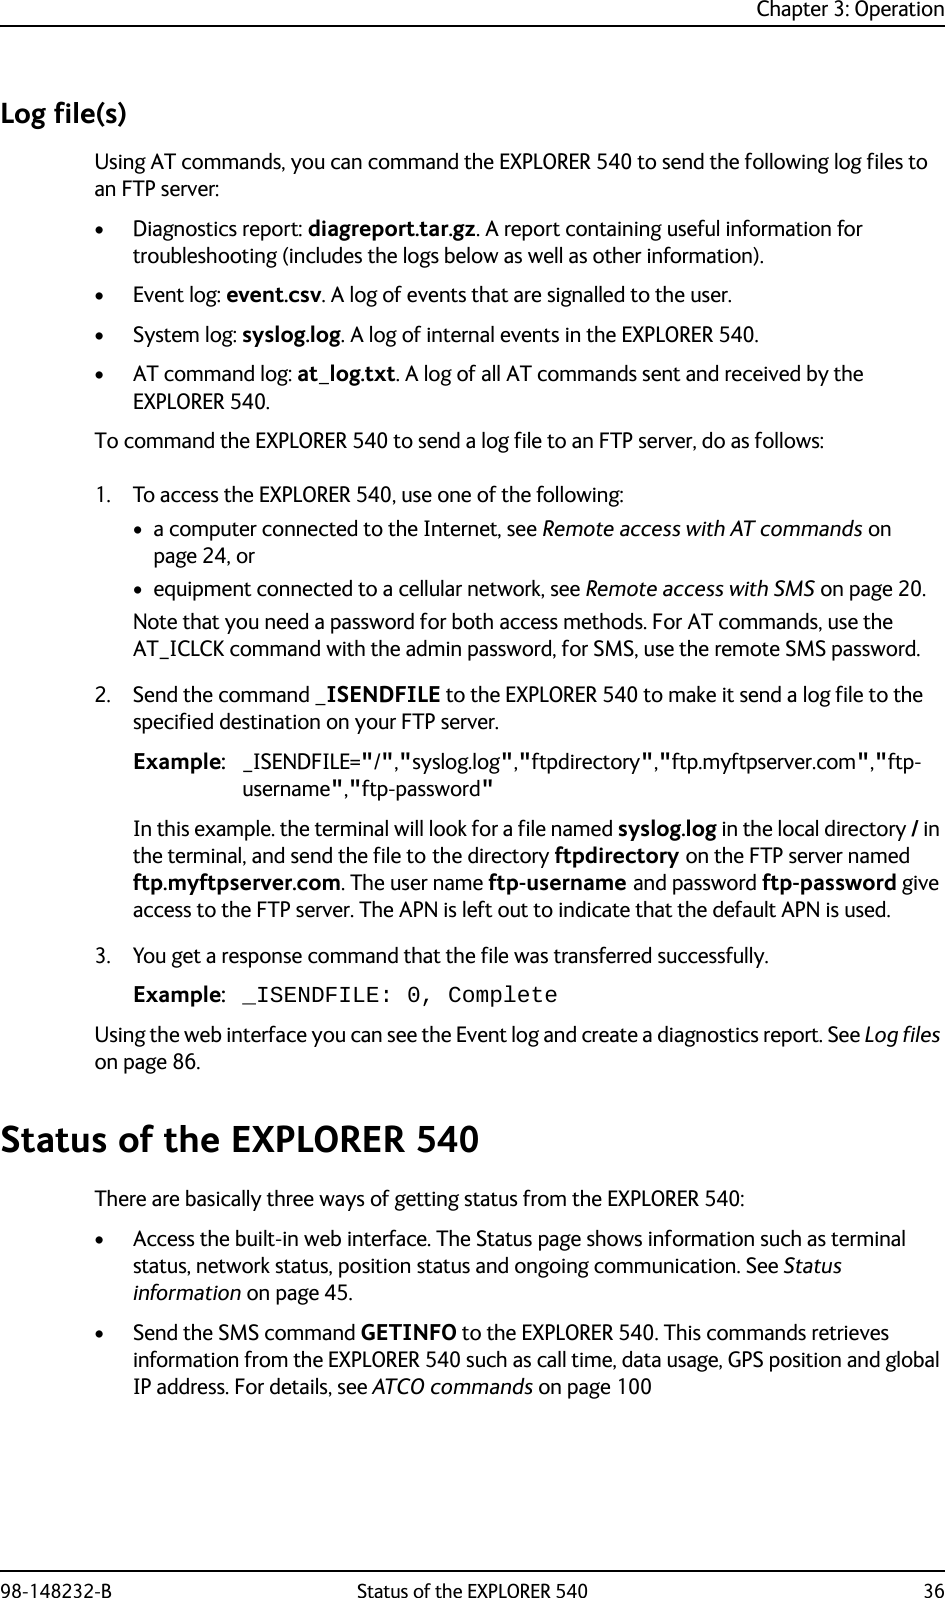 Chapter 3: Operation98-148232-B Status of the EXPLORER 540 36Log file(s)Using AT commands, you can command the EXPLORER 540 to send the following log files to an FTP server:•Diagnostics report: diagreport.tar.gz. A report containing useful information for troubleshooting (includes the logs below as well as other information). •Event log: event.csv. A log of events that are signalled to the user.•System log: syslog.log. A log of internal events in the EXPLORER 540.• AT command log: at_log.txt. A log of all AT commands sent and received by the EXPLORER 540.To command the EXPLORER 540 to send a log file to an FTP server, do as follows:1. To access the EXPLORER 540, use one of the following:• a computer connected to the Internet, see Remote access with AT commands on page 24, or• equipment connected to a cellular network, see Remote access with SMS on page 20.Note that you need a password for both access methods. For AT commands, use the AT_ICLCK command with the admin password, for SMS, use the remote SMS password.2. Send the command _ISENDFILE to the EXPLORER 540 to make it send a log file to the specified destination on your FTP server. Example: _ISENDFILE=&quot;/&quot;,&quot;syslog.log&quot;,&quot;ftpdirectory&quot;,&quot;ftp.myftpserver.com&quot;,&quot;ftp-username&quot;,&quot;ftp-password&quot;In this example. the terminal will look for a file named syslog.log in the local directory / in the terminal, and send the file to the directory ftpdirectory on the FTP server named ftp.myftpserver.com. The user name ftp-username and password ftp-password give access to the FTP server. The APN is left out to indicate that the default APN is used.3. You get a response command that the file was transferred successfully.Example: _ISENDFILE: 0, CompleteUsing the web interface you can see the Event log and create a diagnostics report. See Log files on page 86.Status of the EXPLORER 540There are basically three ways of getting status from the EXPLORER 540:• Access the built-in web interface. The Status page shows information such as terminal status, network status, position status and ongoing communication. See Status information on page 45.• Send the SMS command GETINFO to the EXPLORER 540. This commands retrieves information from the EXPLORER 540 such as call time, data usage, GPS position and global IP address. For details, see ATCO commands on page 100